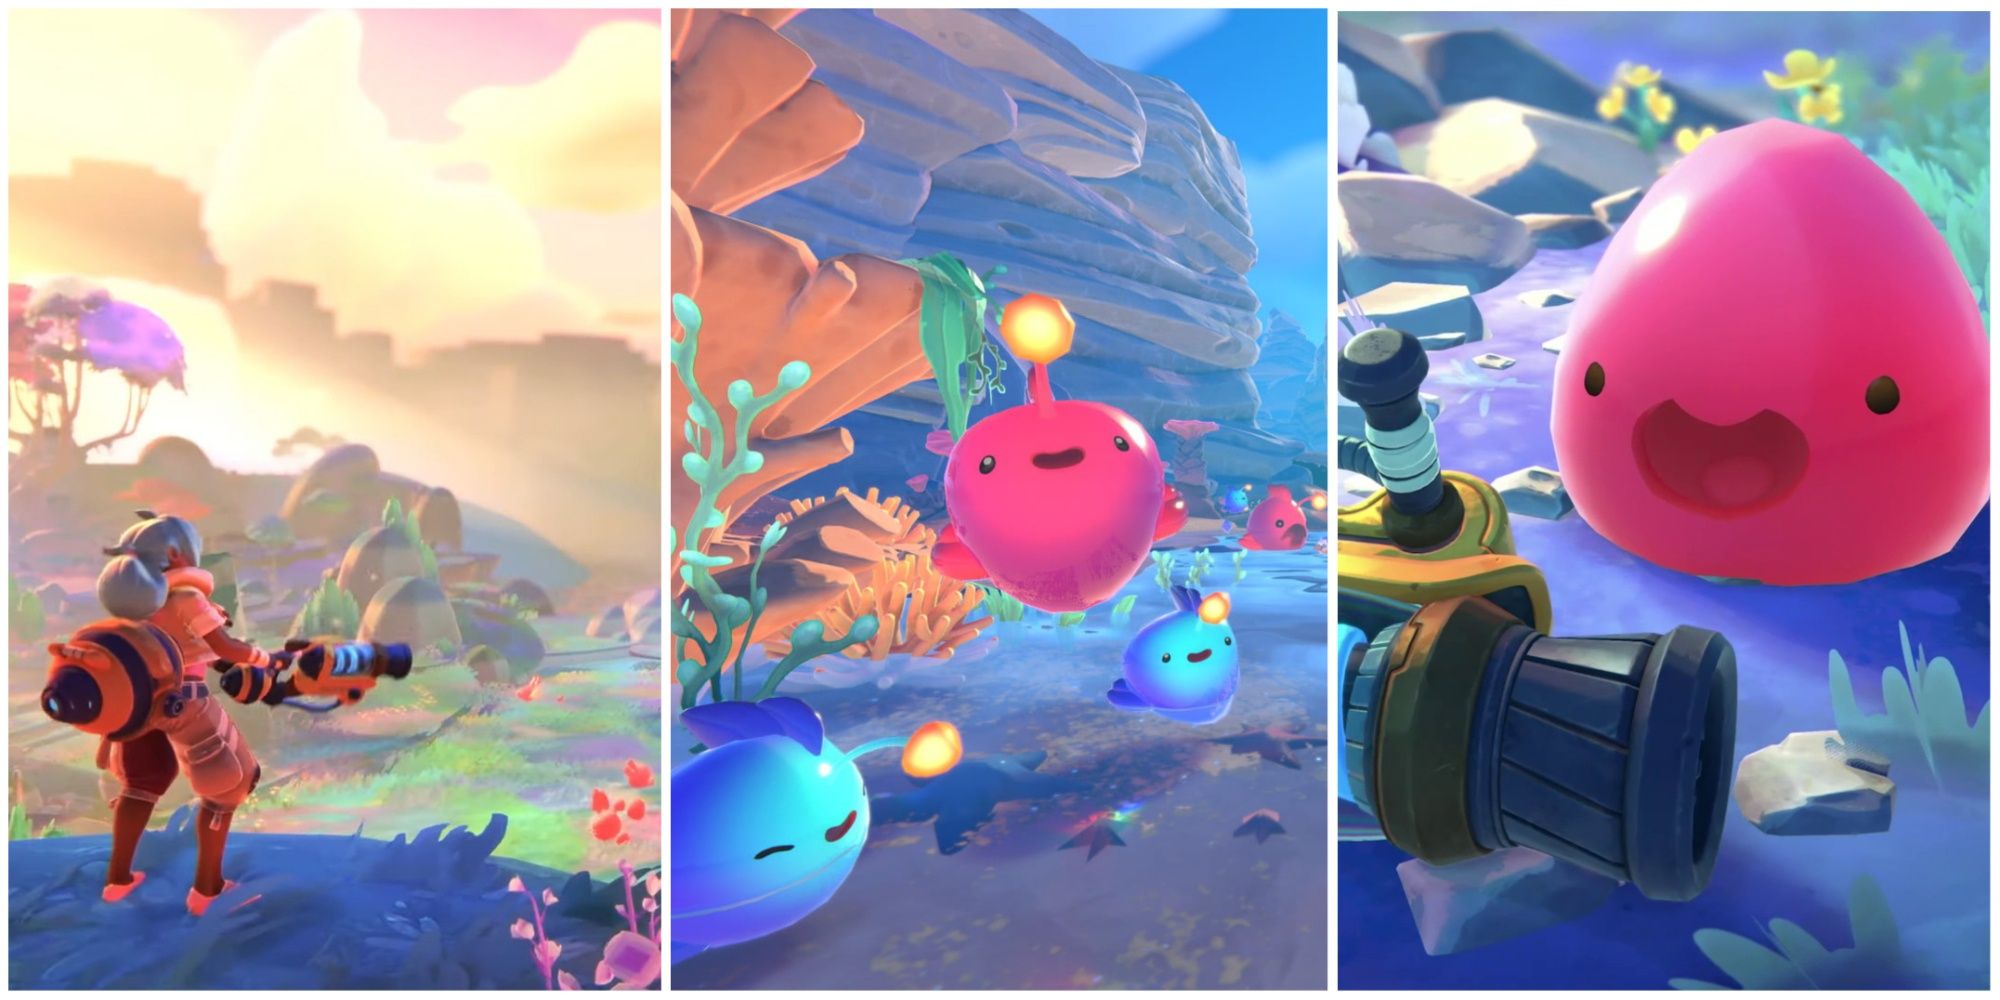 Slime Rancher 2 featured image showing main character with vista, slimes bouncing, a pink slime